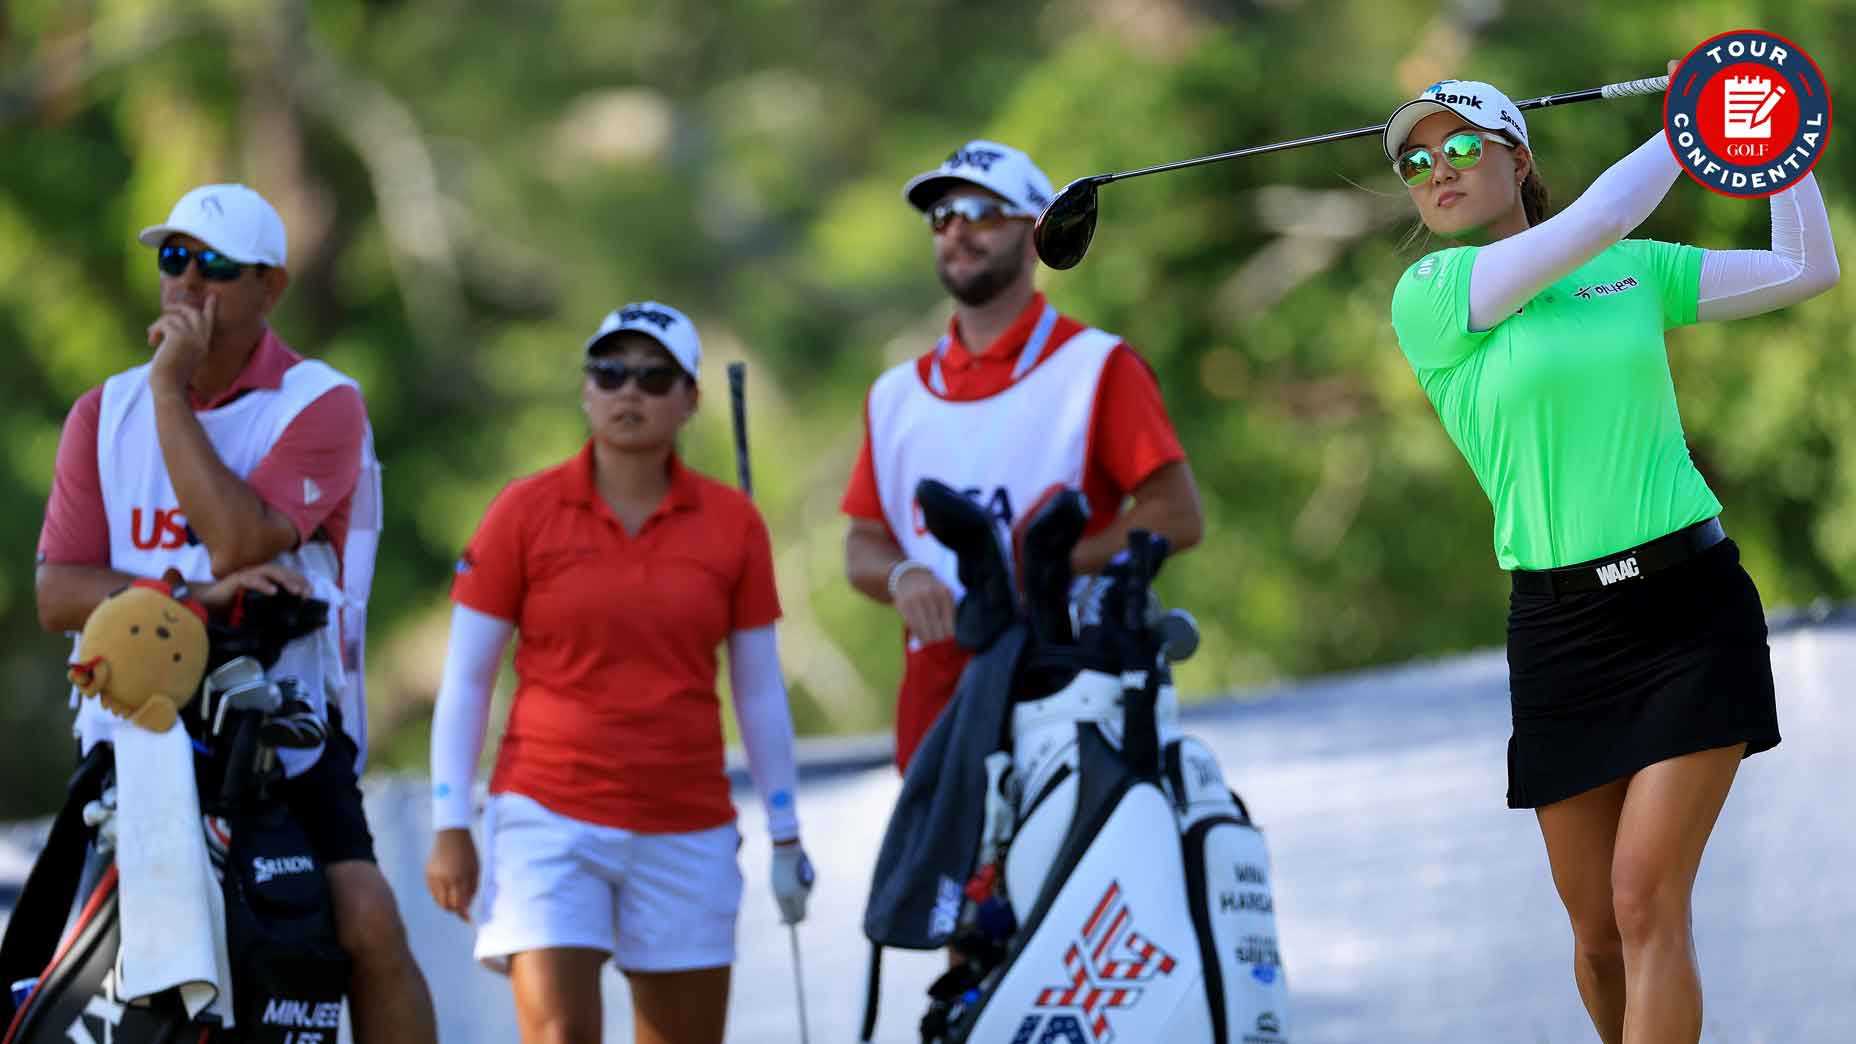 Minjee Lee hits the driver at the US Women's Open